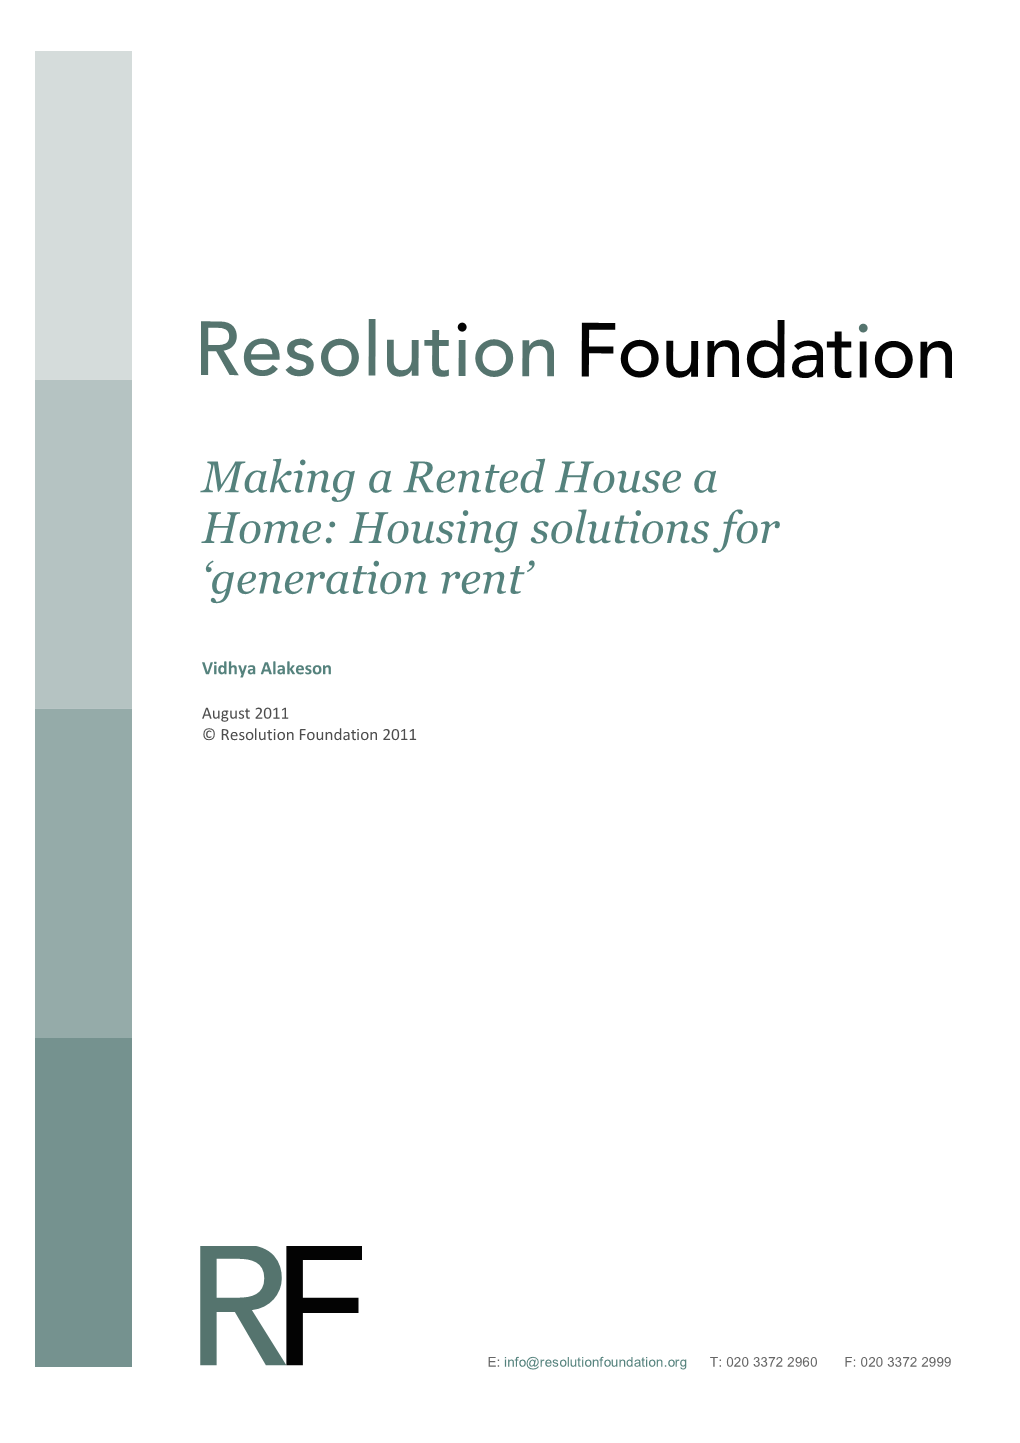 Making a Rented House a Home: Housing Solutions for 'Generation